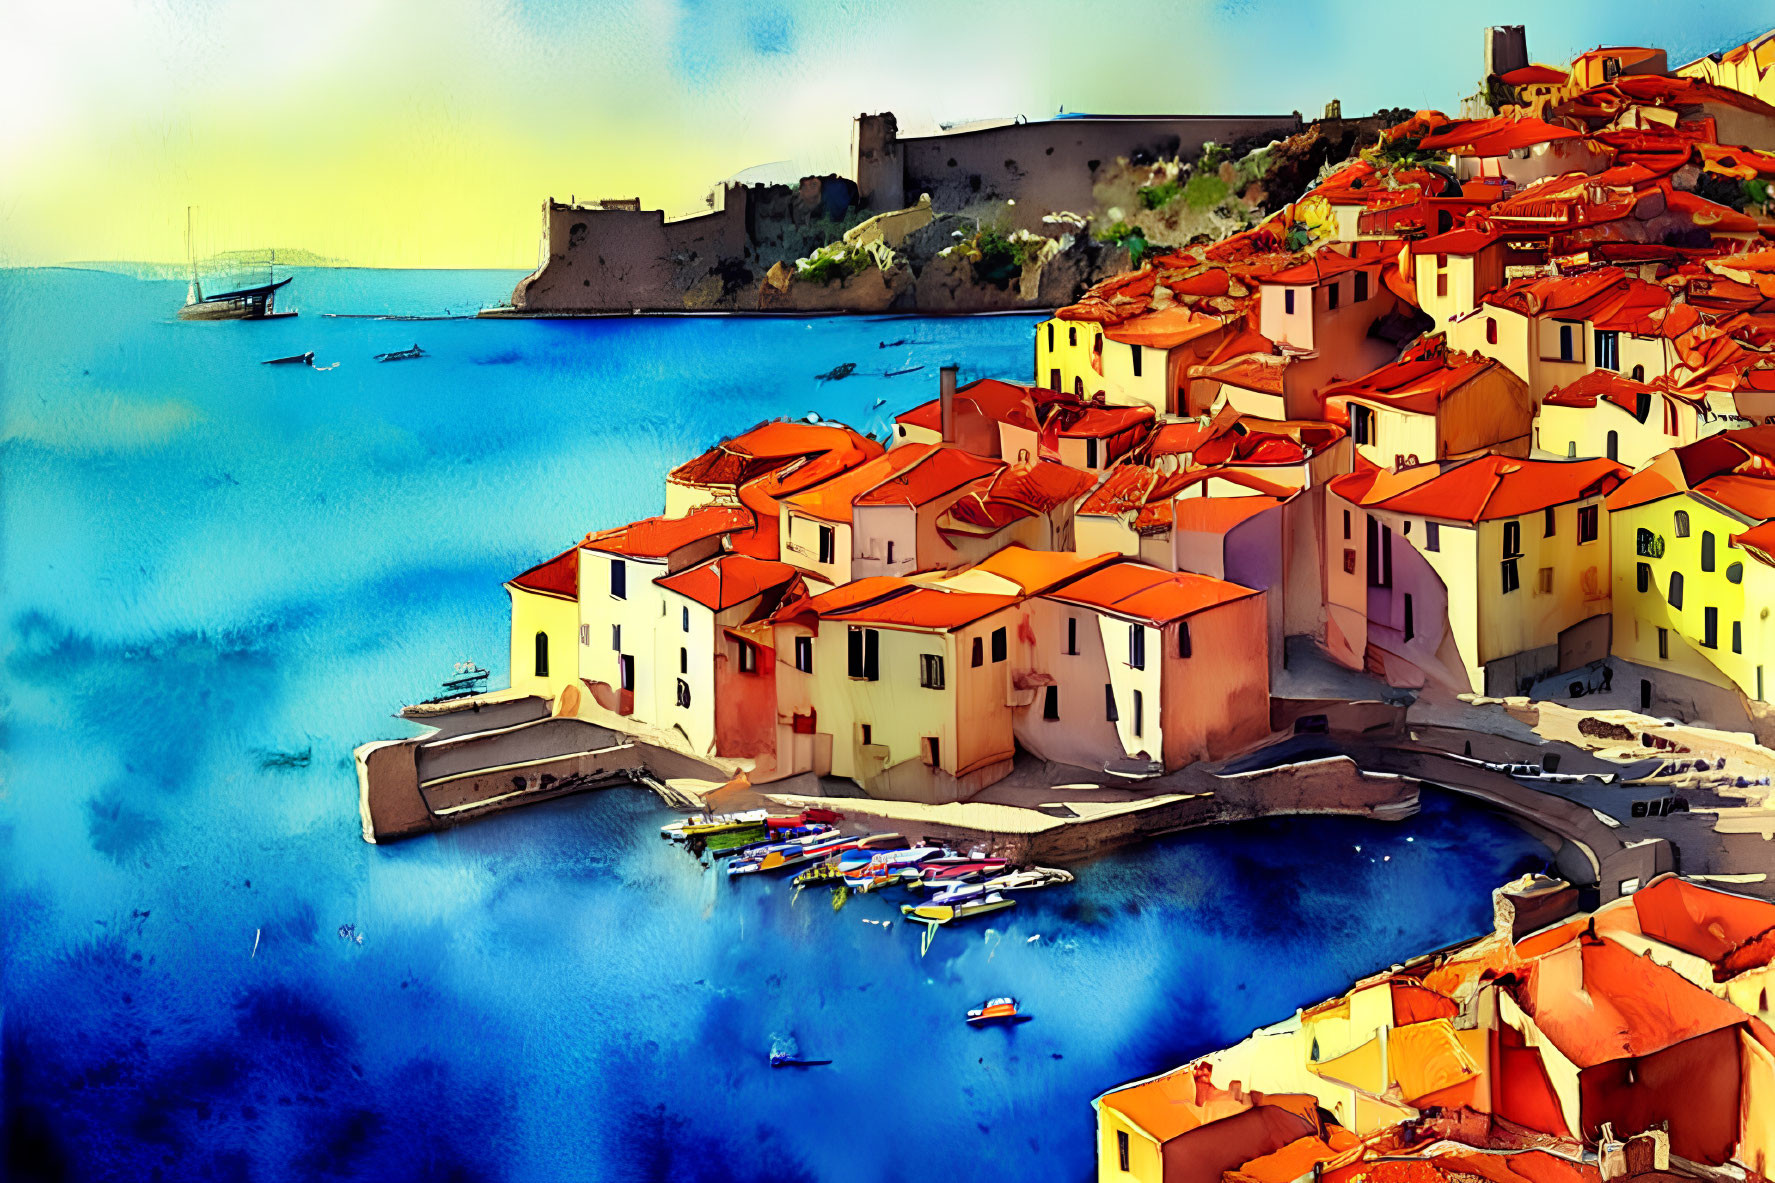 Picturesque Seaside Village with Terracotta Roofs and Castle on Hill